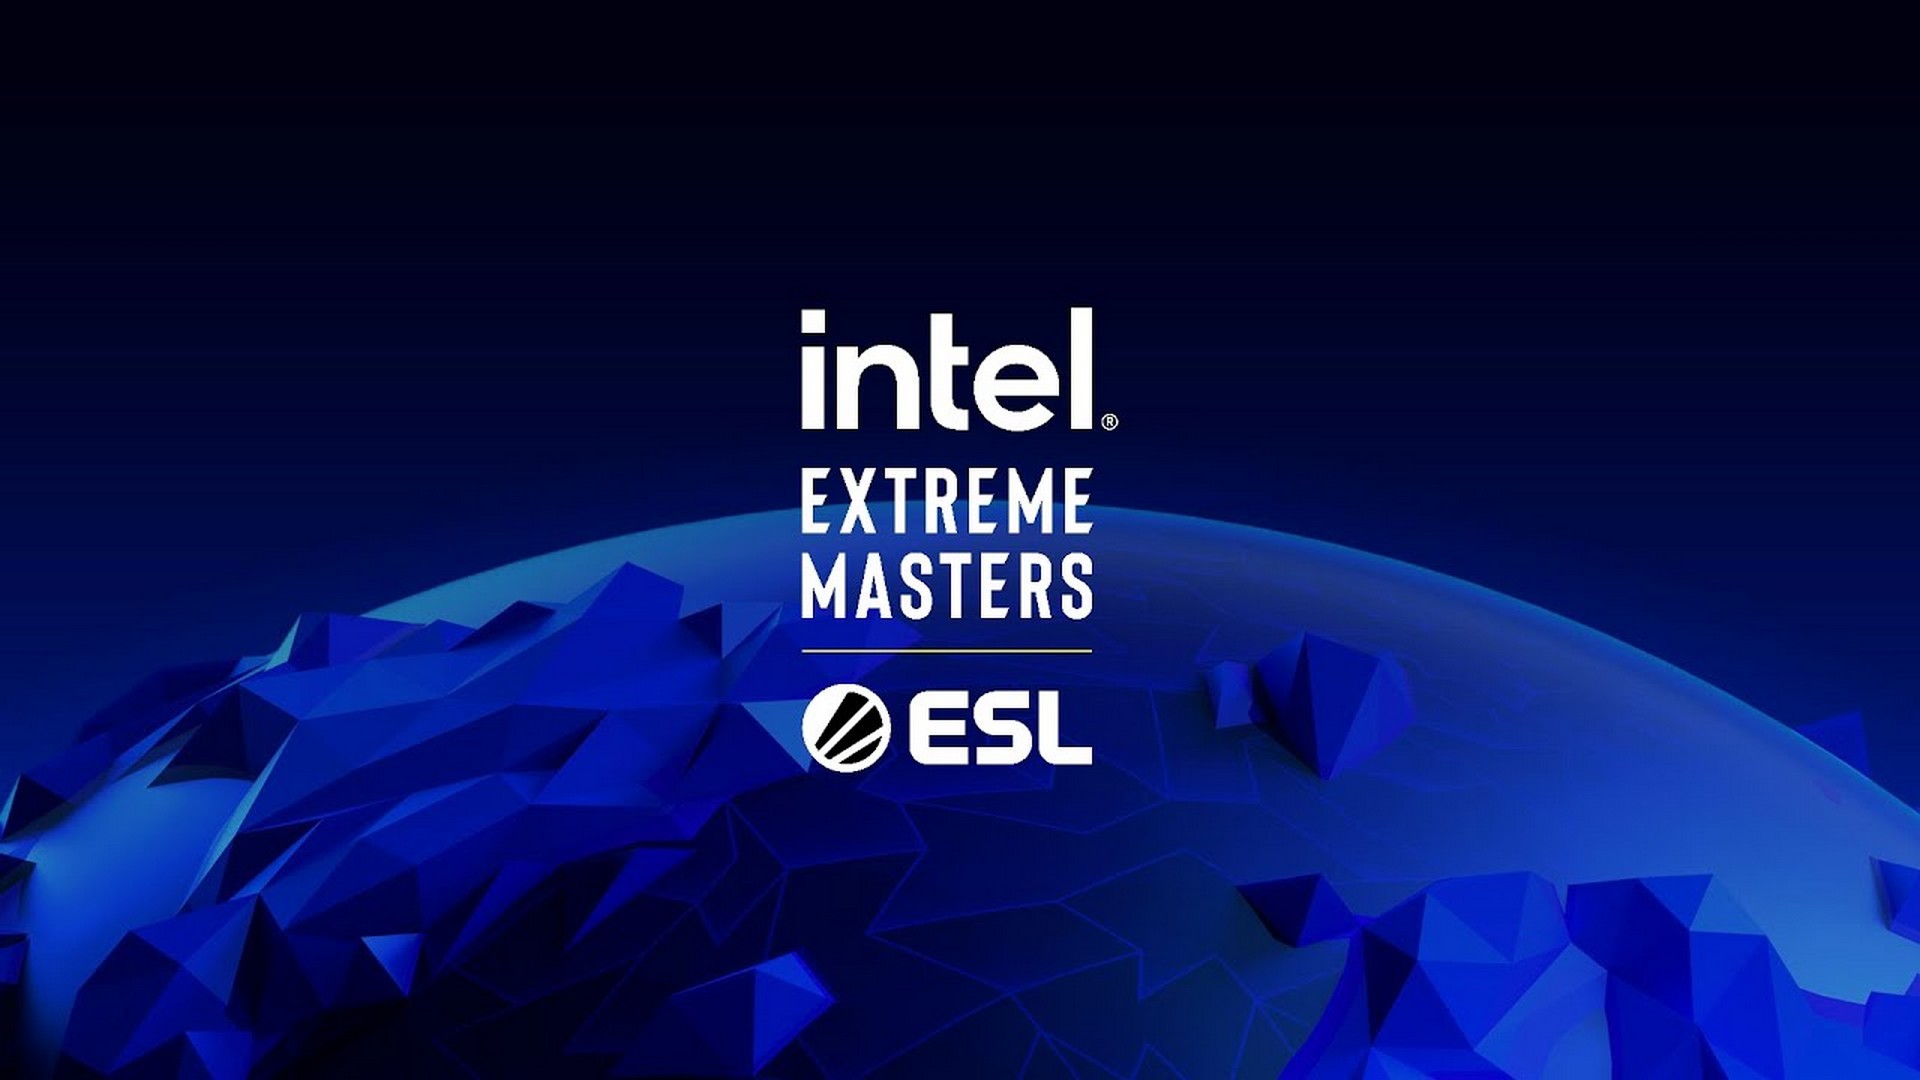 ESL Gaming Celebrate 10 Years Of Intel Extreme Masters With The Return Of  IEM Katowice Featuring a Combined $1.5M Prize Pool